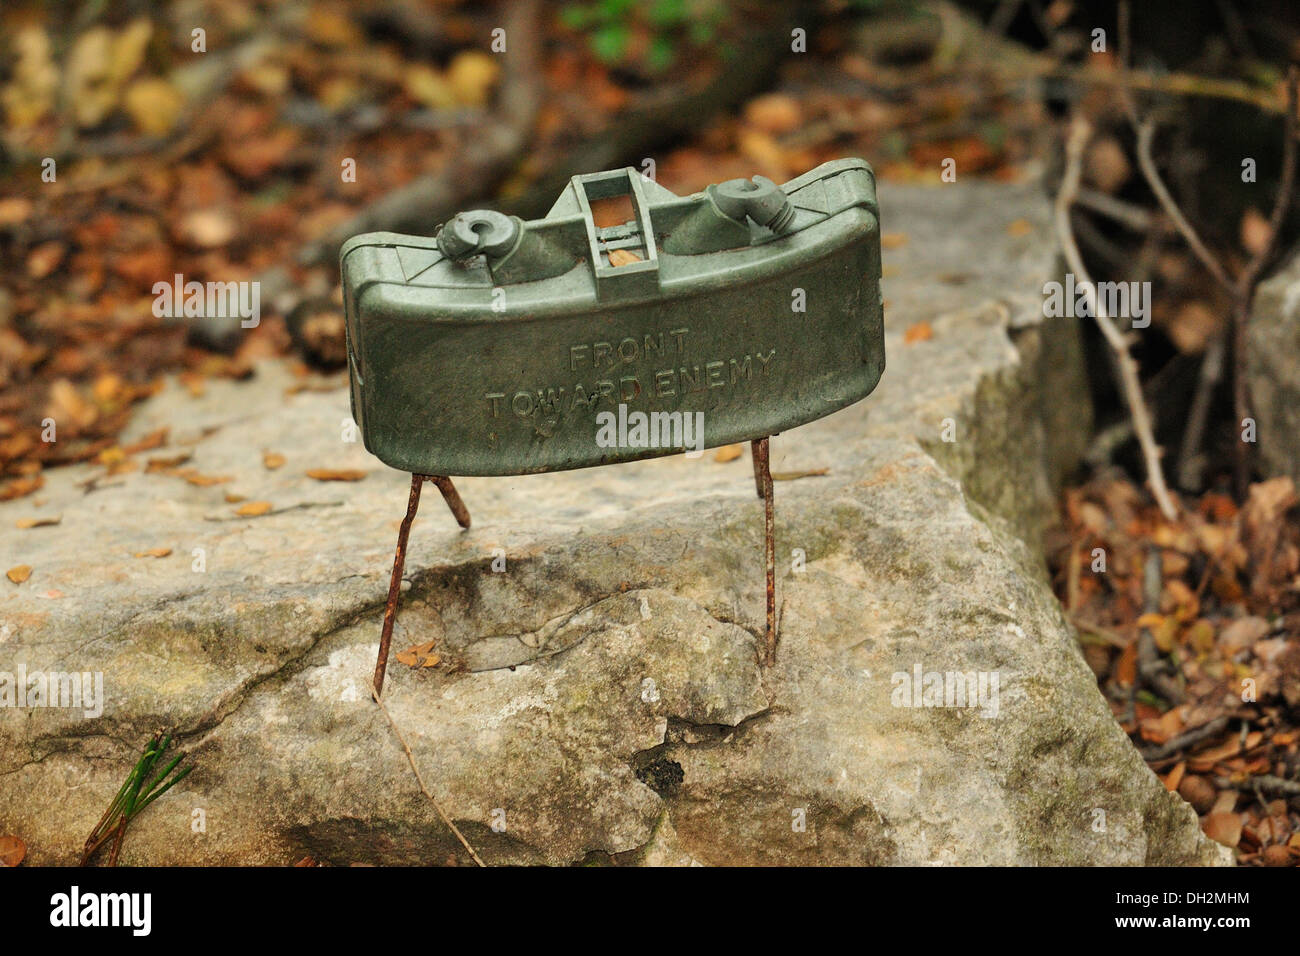 http://c8.alamy.com/comp/DH2MHM/the-m18a1-claymore-is-a-directional-anti-personnel-mine-used-by-the-DH2MHM.jpg